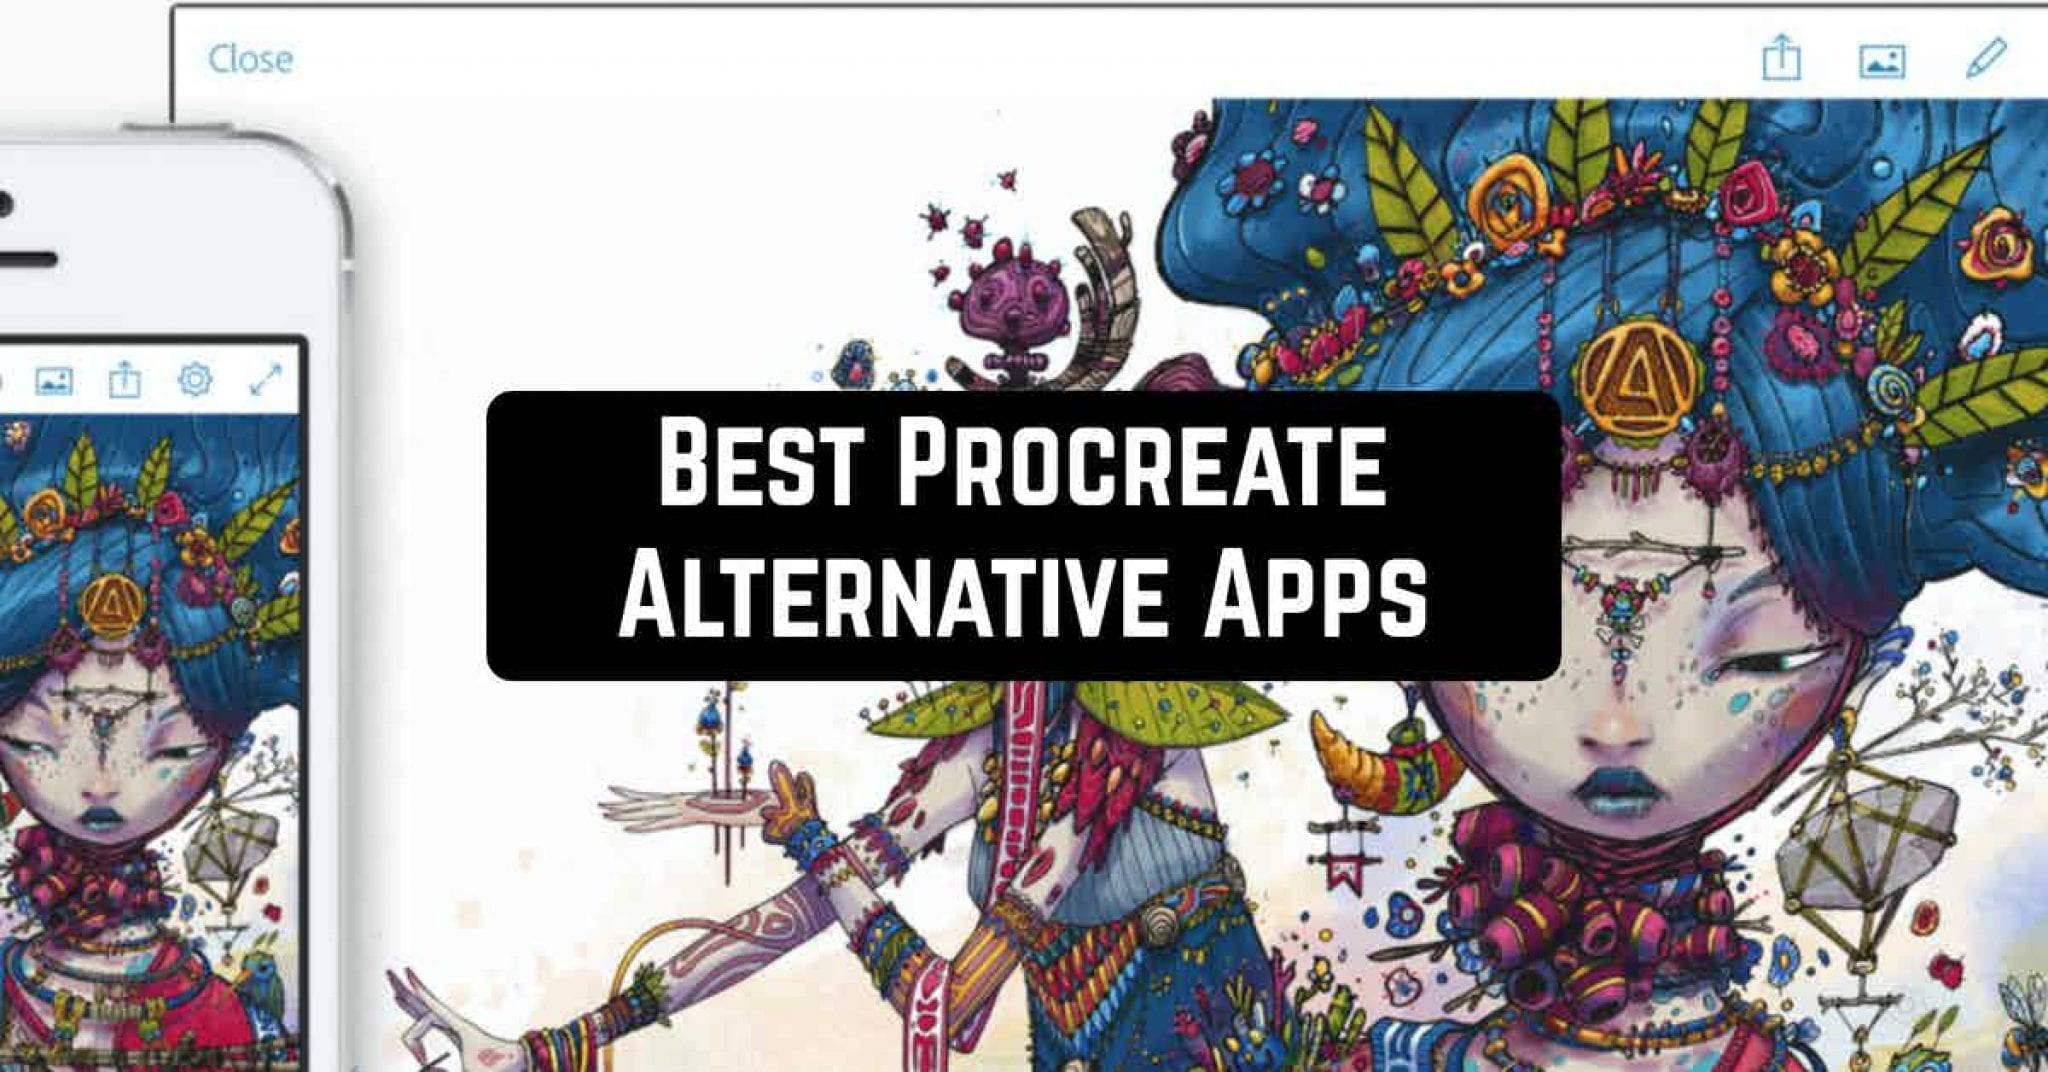 apps similar to procreate for android